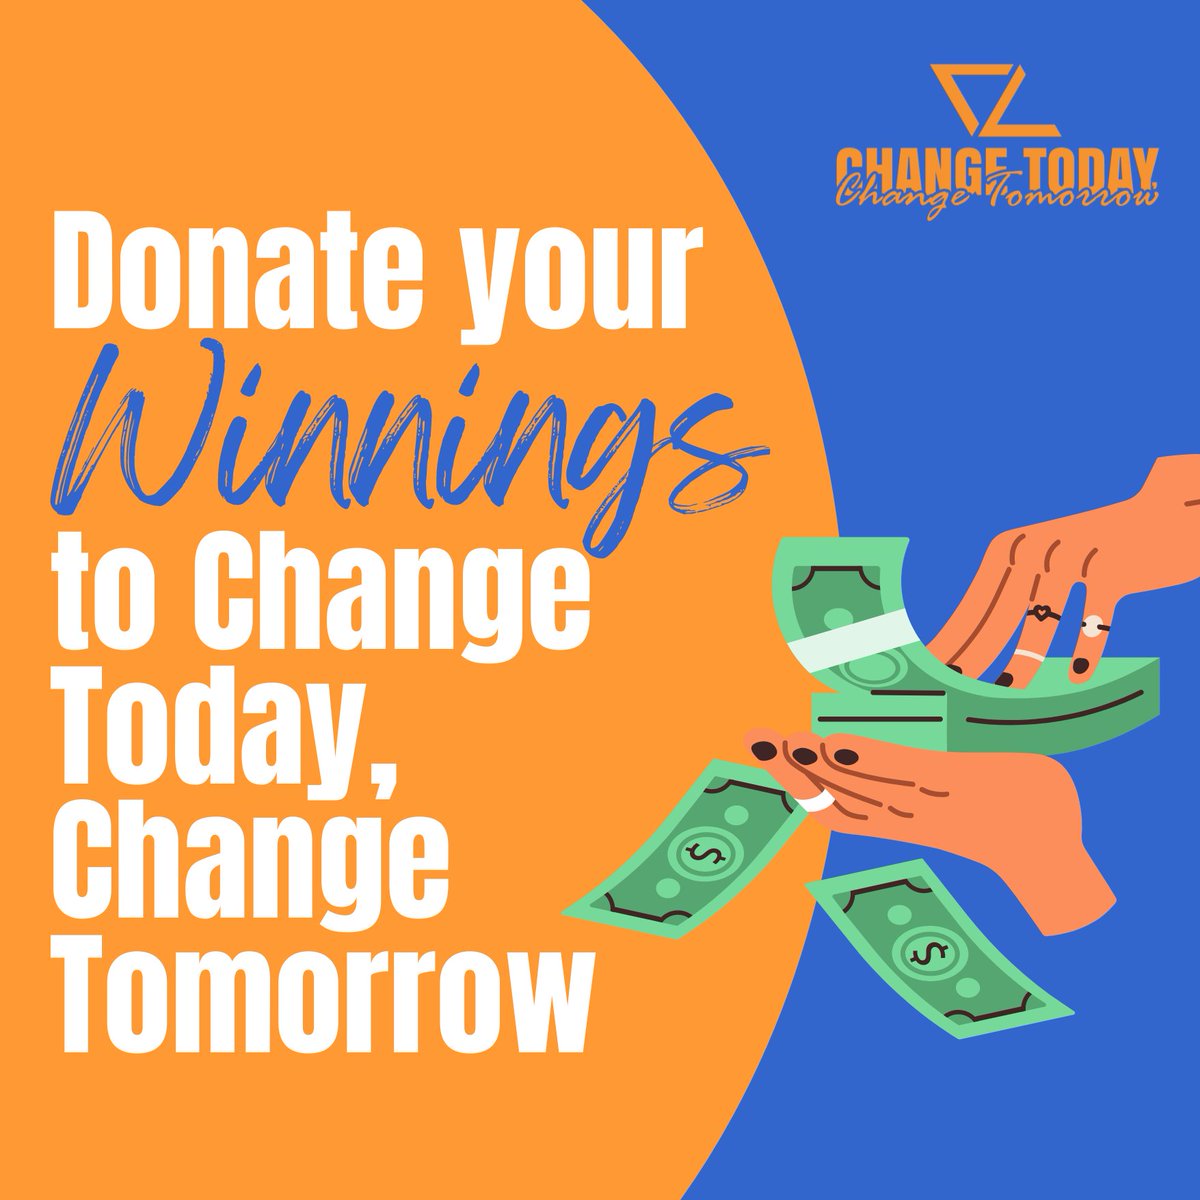 🏇🌟 Ready to cash in on that big #KentuckyDerby win? Consider putting some of those winnings towards creating positive change in Louisville! Your support can make a real difference. Donate today at change-today.org/support and help build a better community for all. 🙌🏆